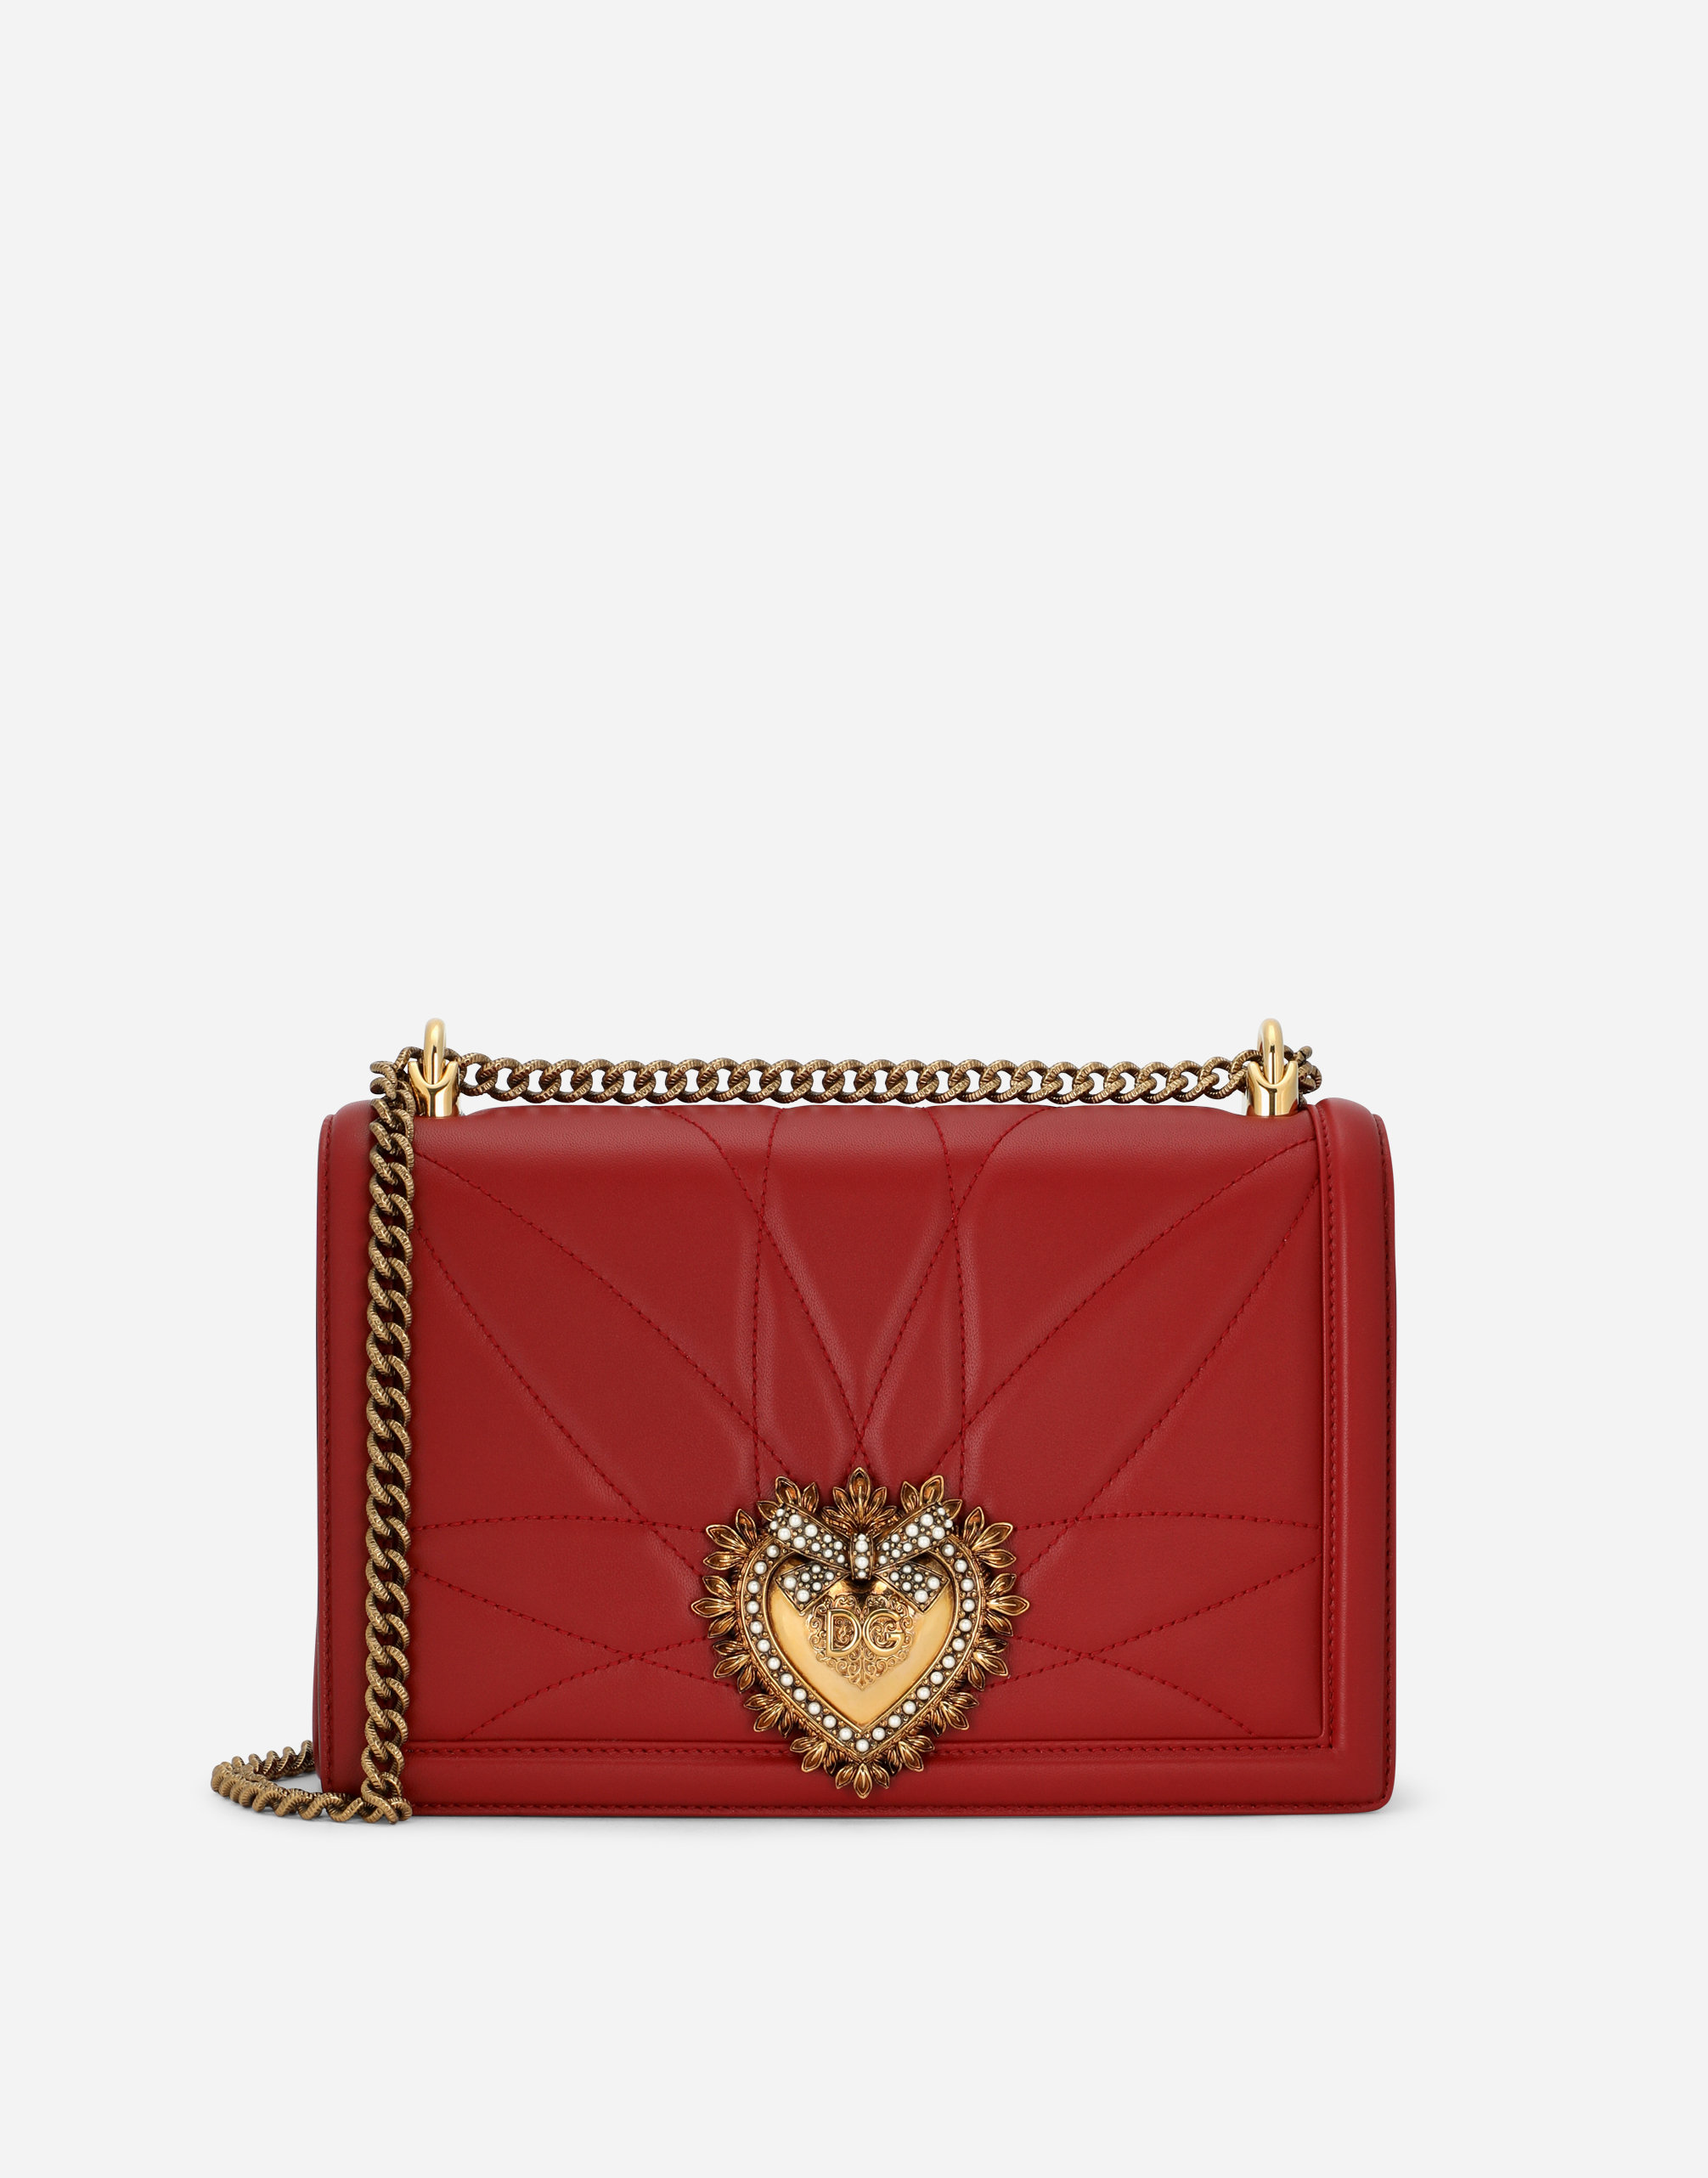 Large matelassé nappa leather Devotion bag in Red